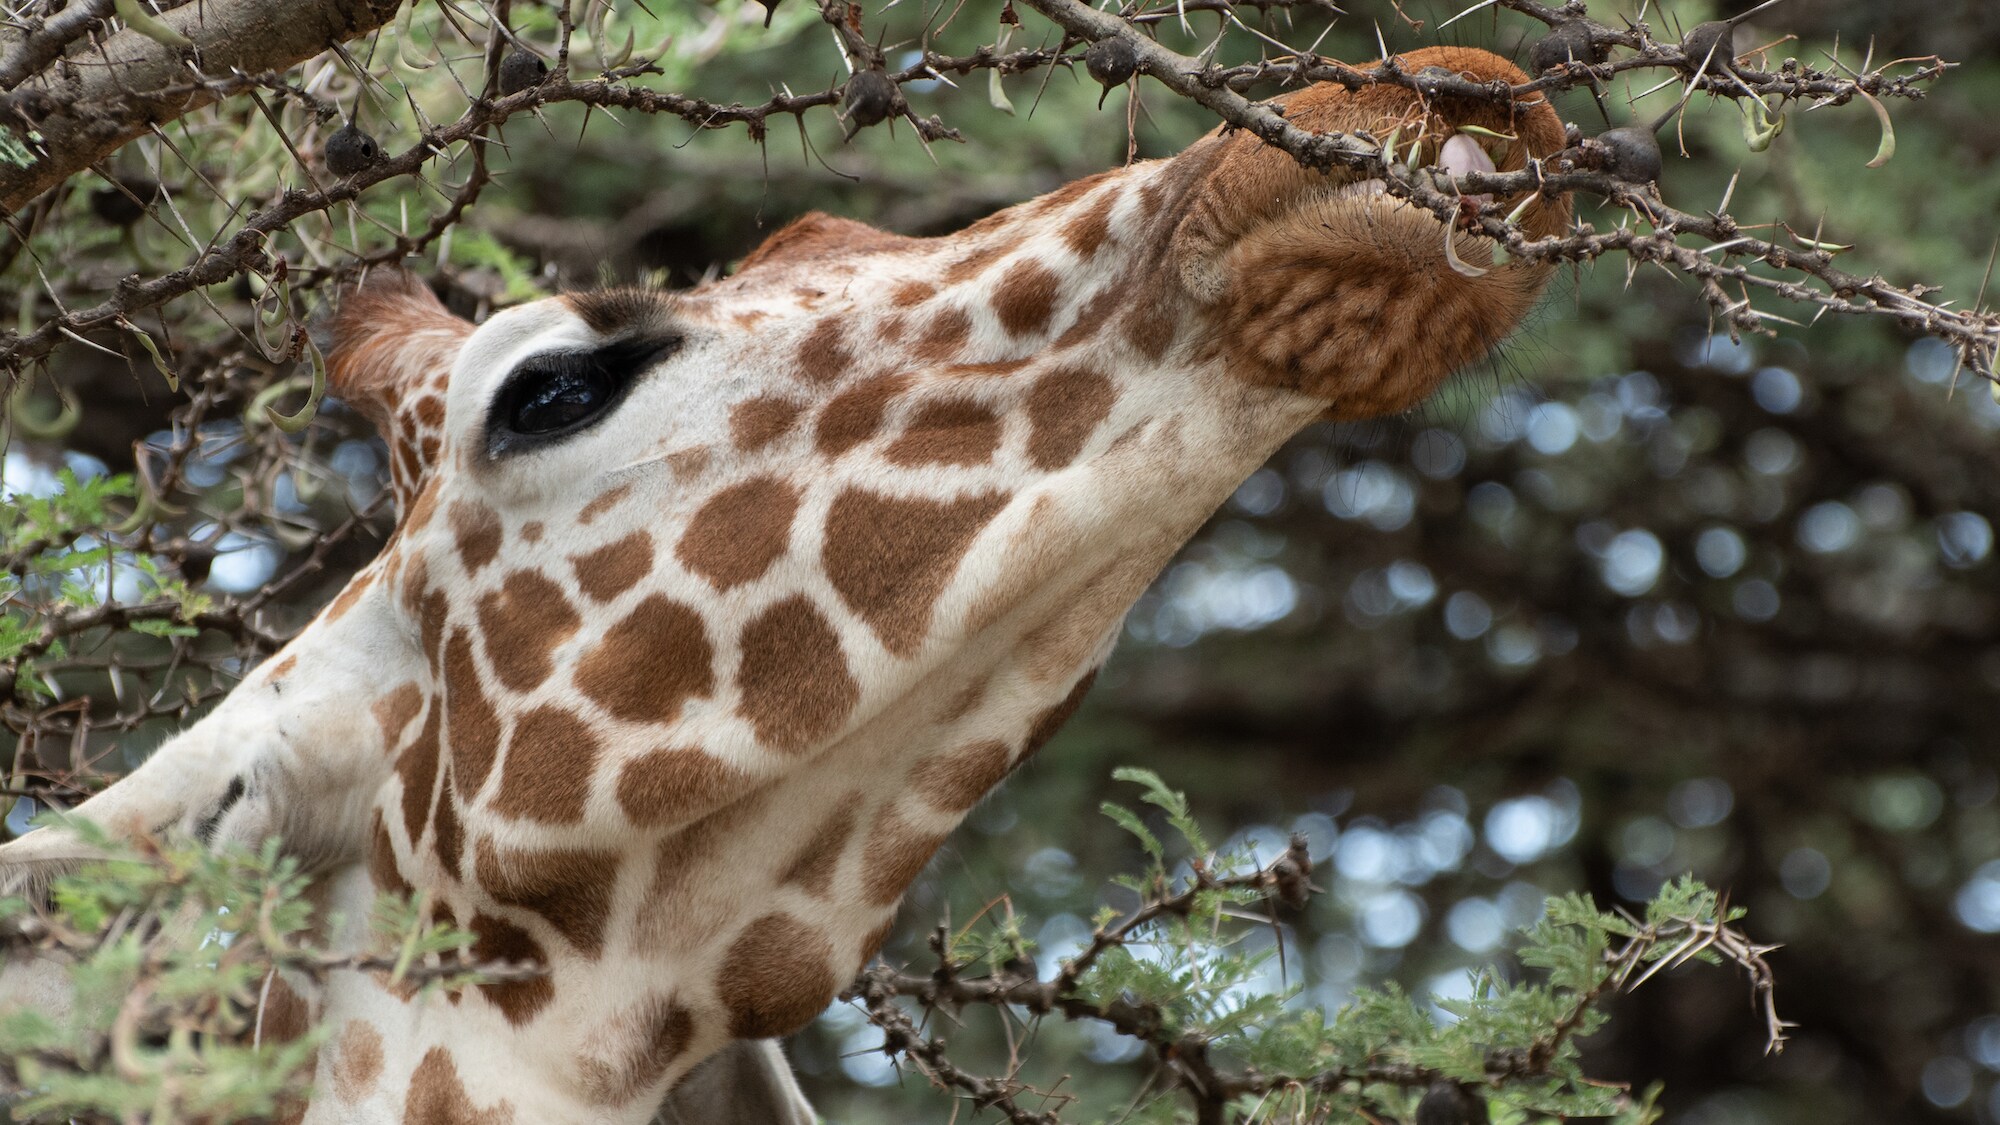 A Giraffe eating from an Acacia tree in Ol Pejeta National Park.  (National Geographic for Disney+/Maurice Oniang’o)